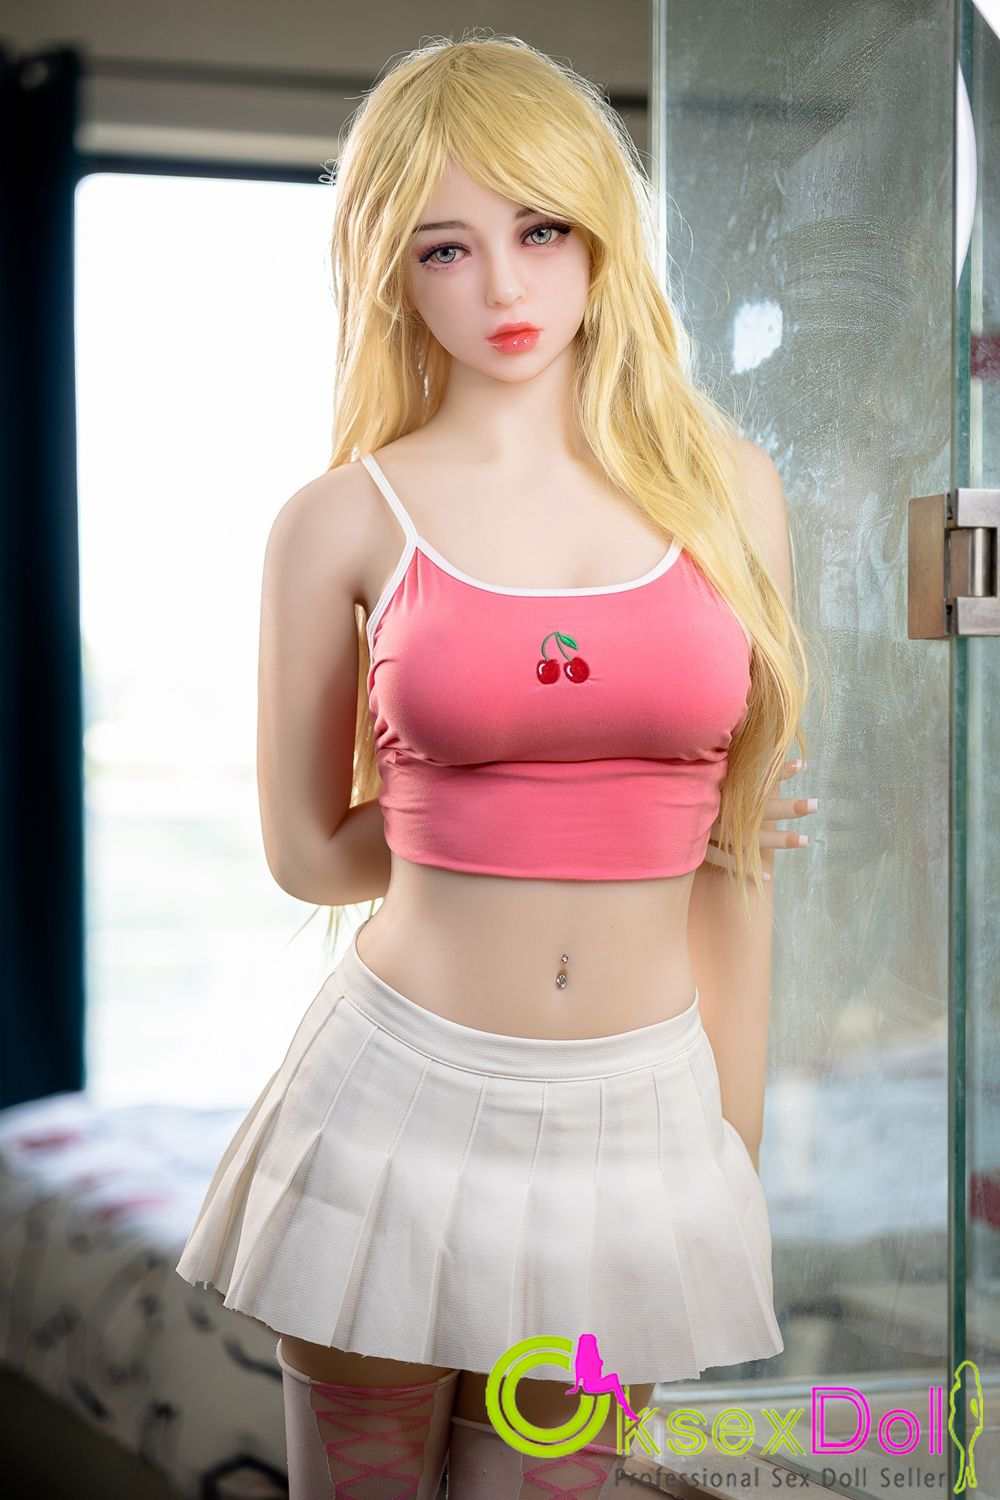 TPE real doll Gallery